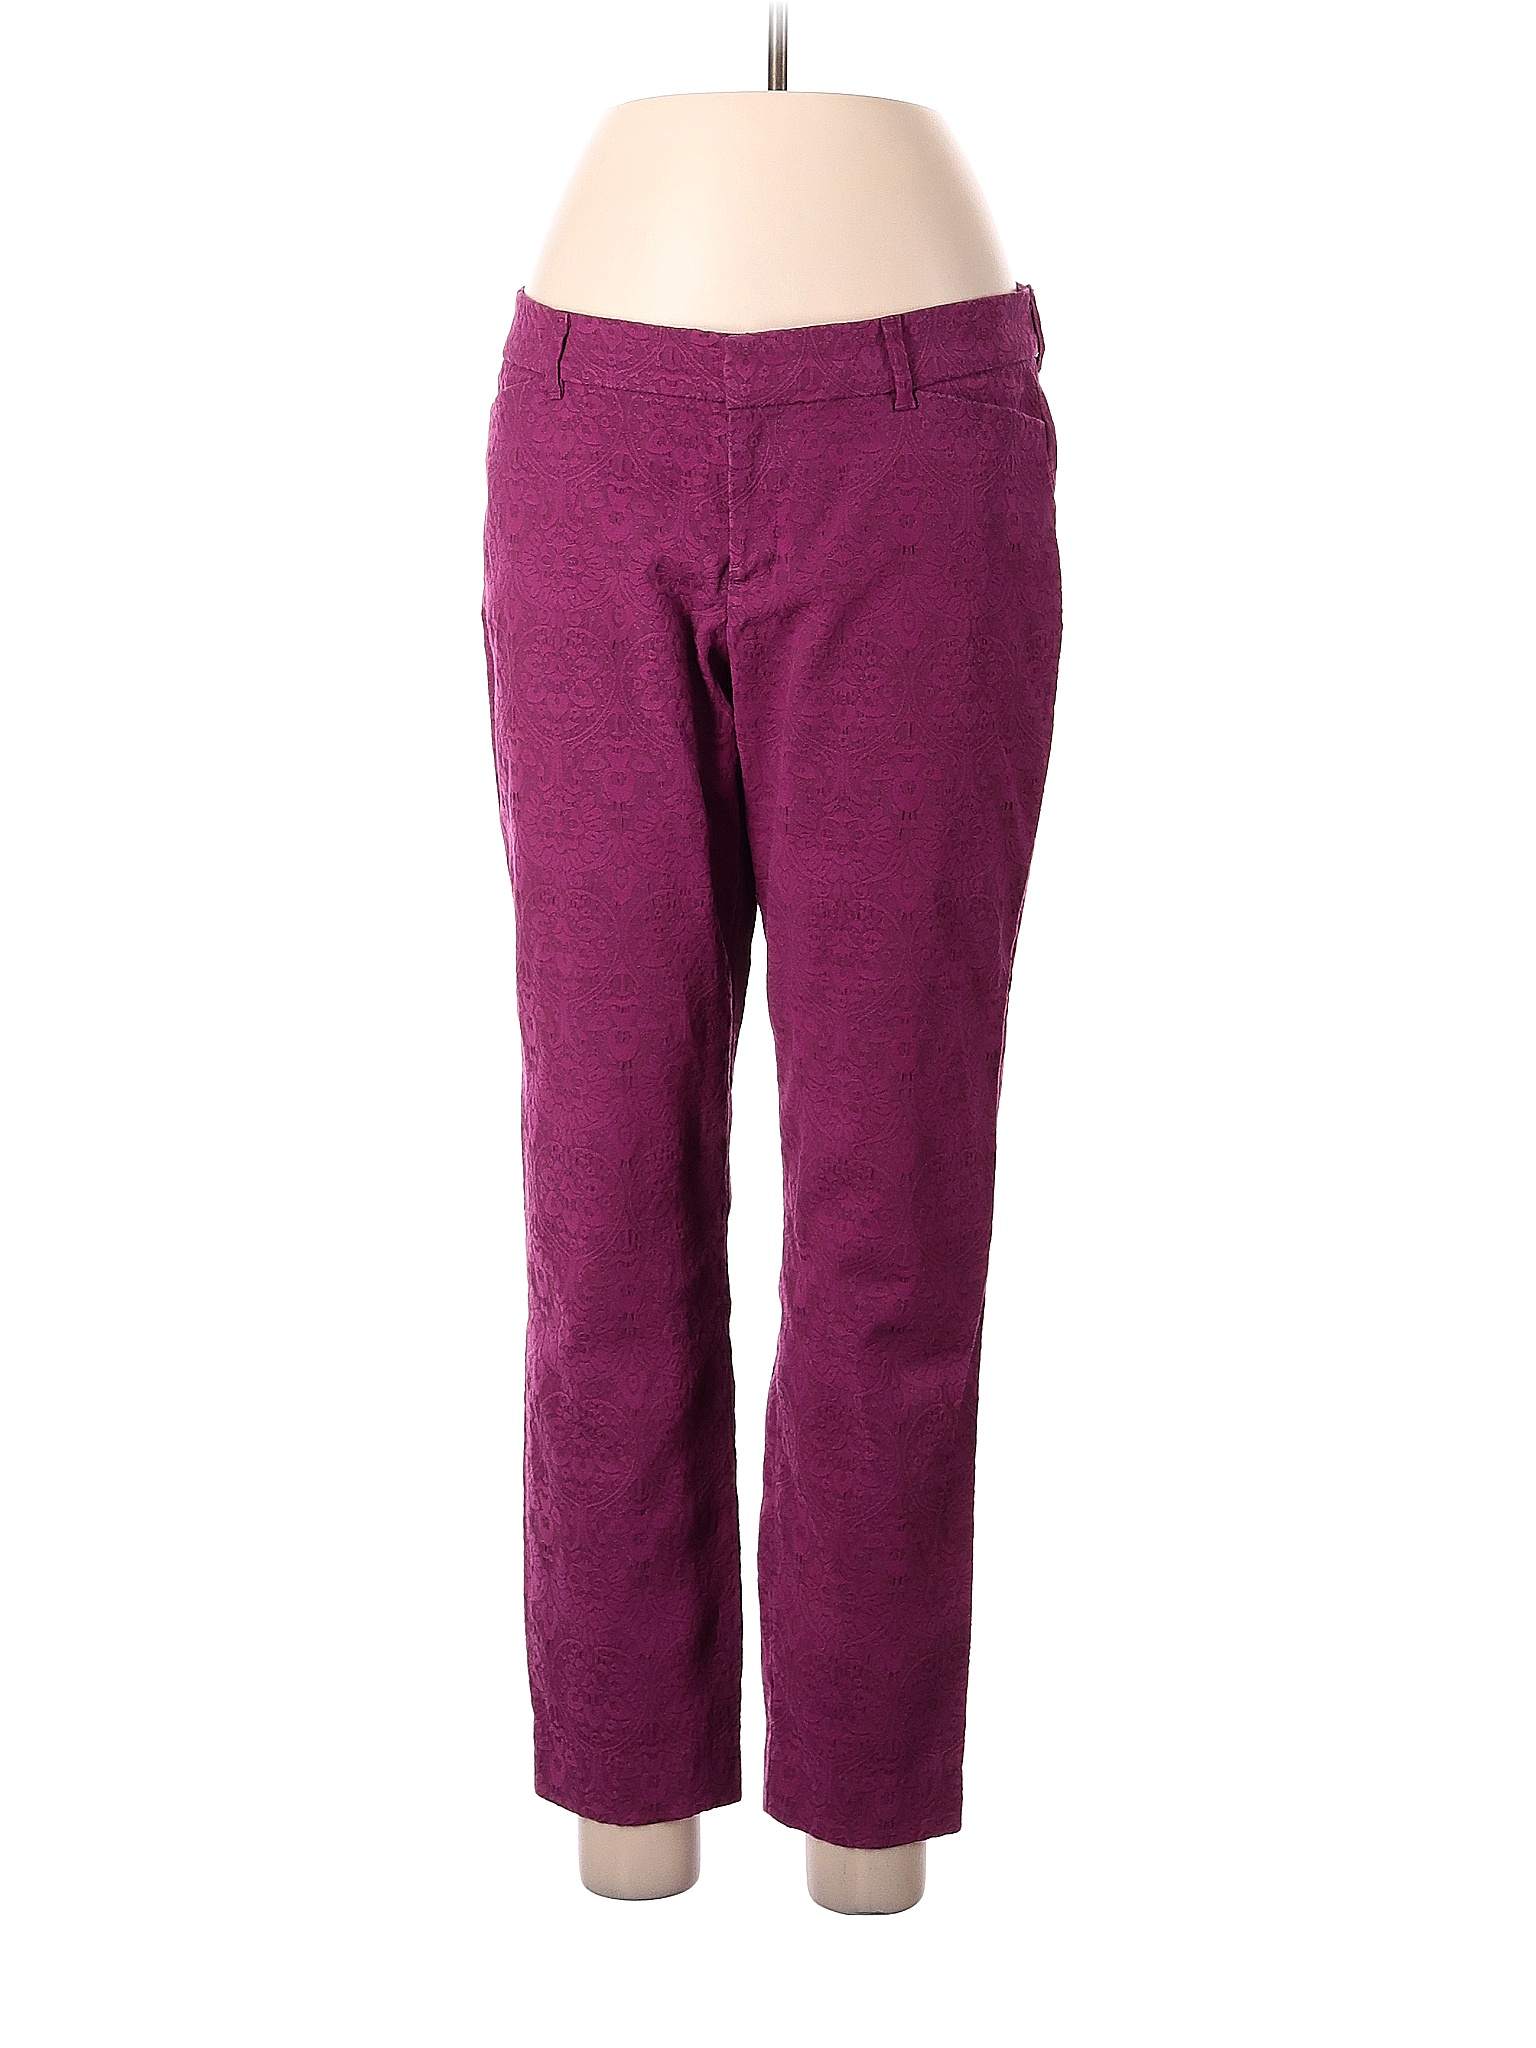 Old Navy Women's Pants On Sale Up To 90% Off Retail | thredUP